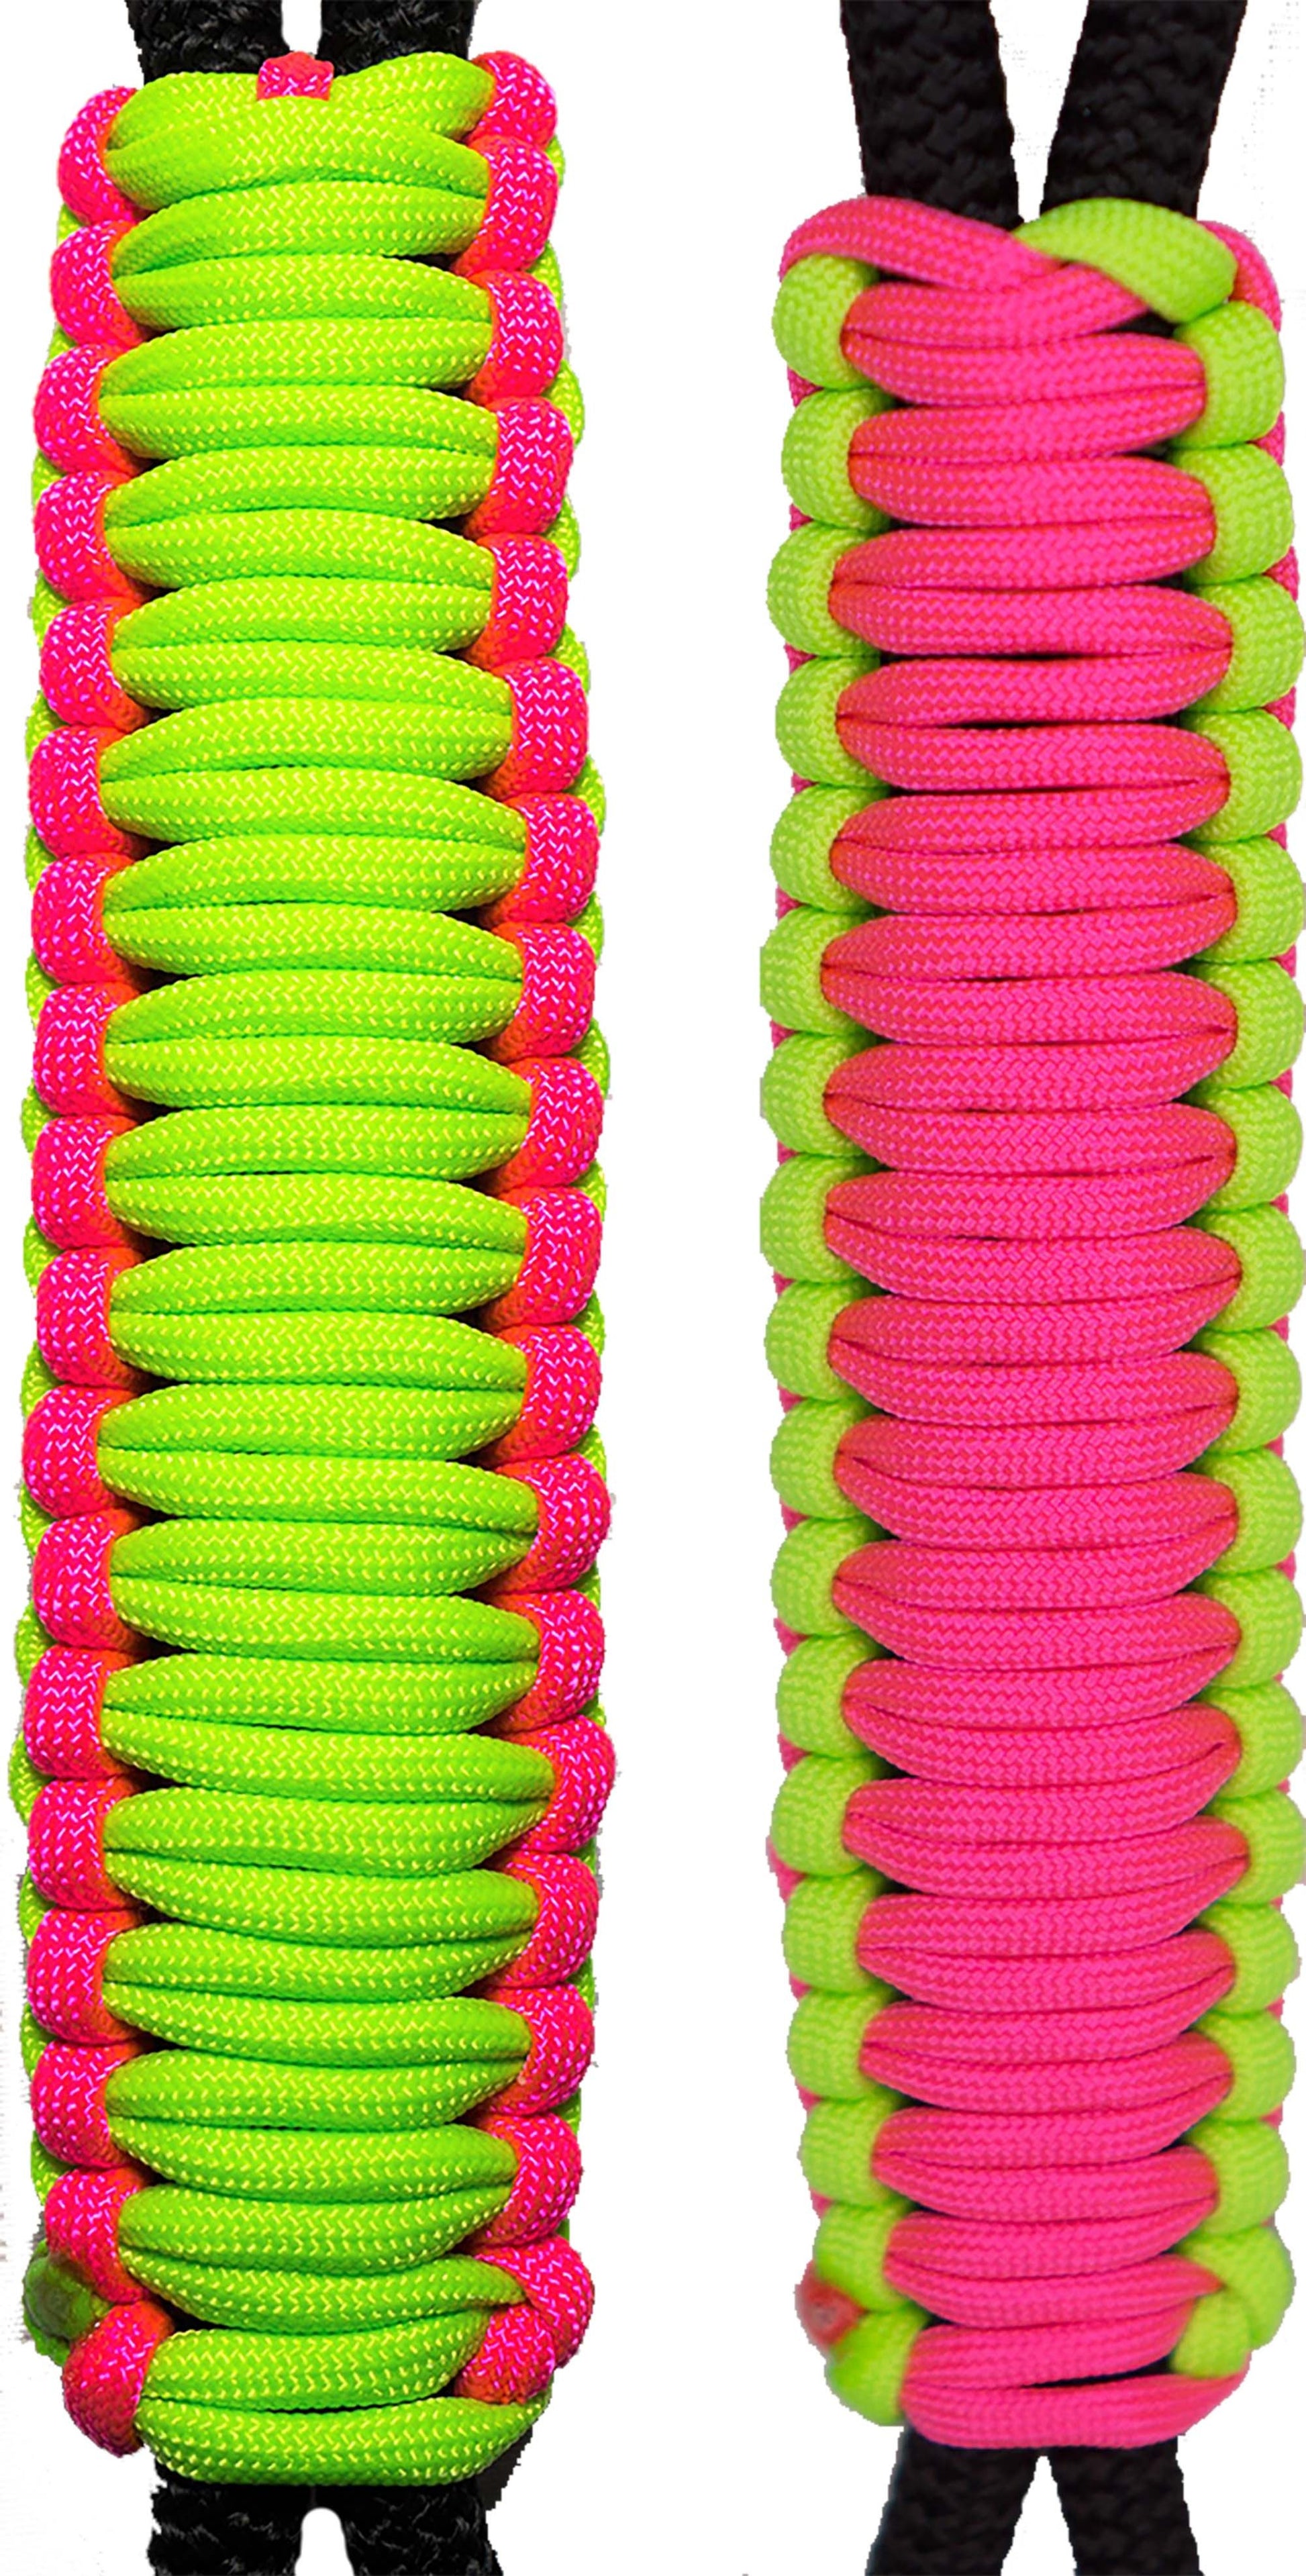 Neon Pink & Neon Green C008C023 Paracord Handmade Handles for Stainless Steel Tumblers - Made in USA!